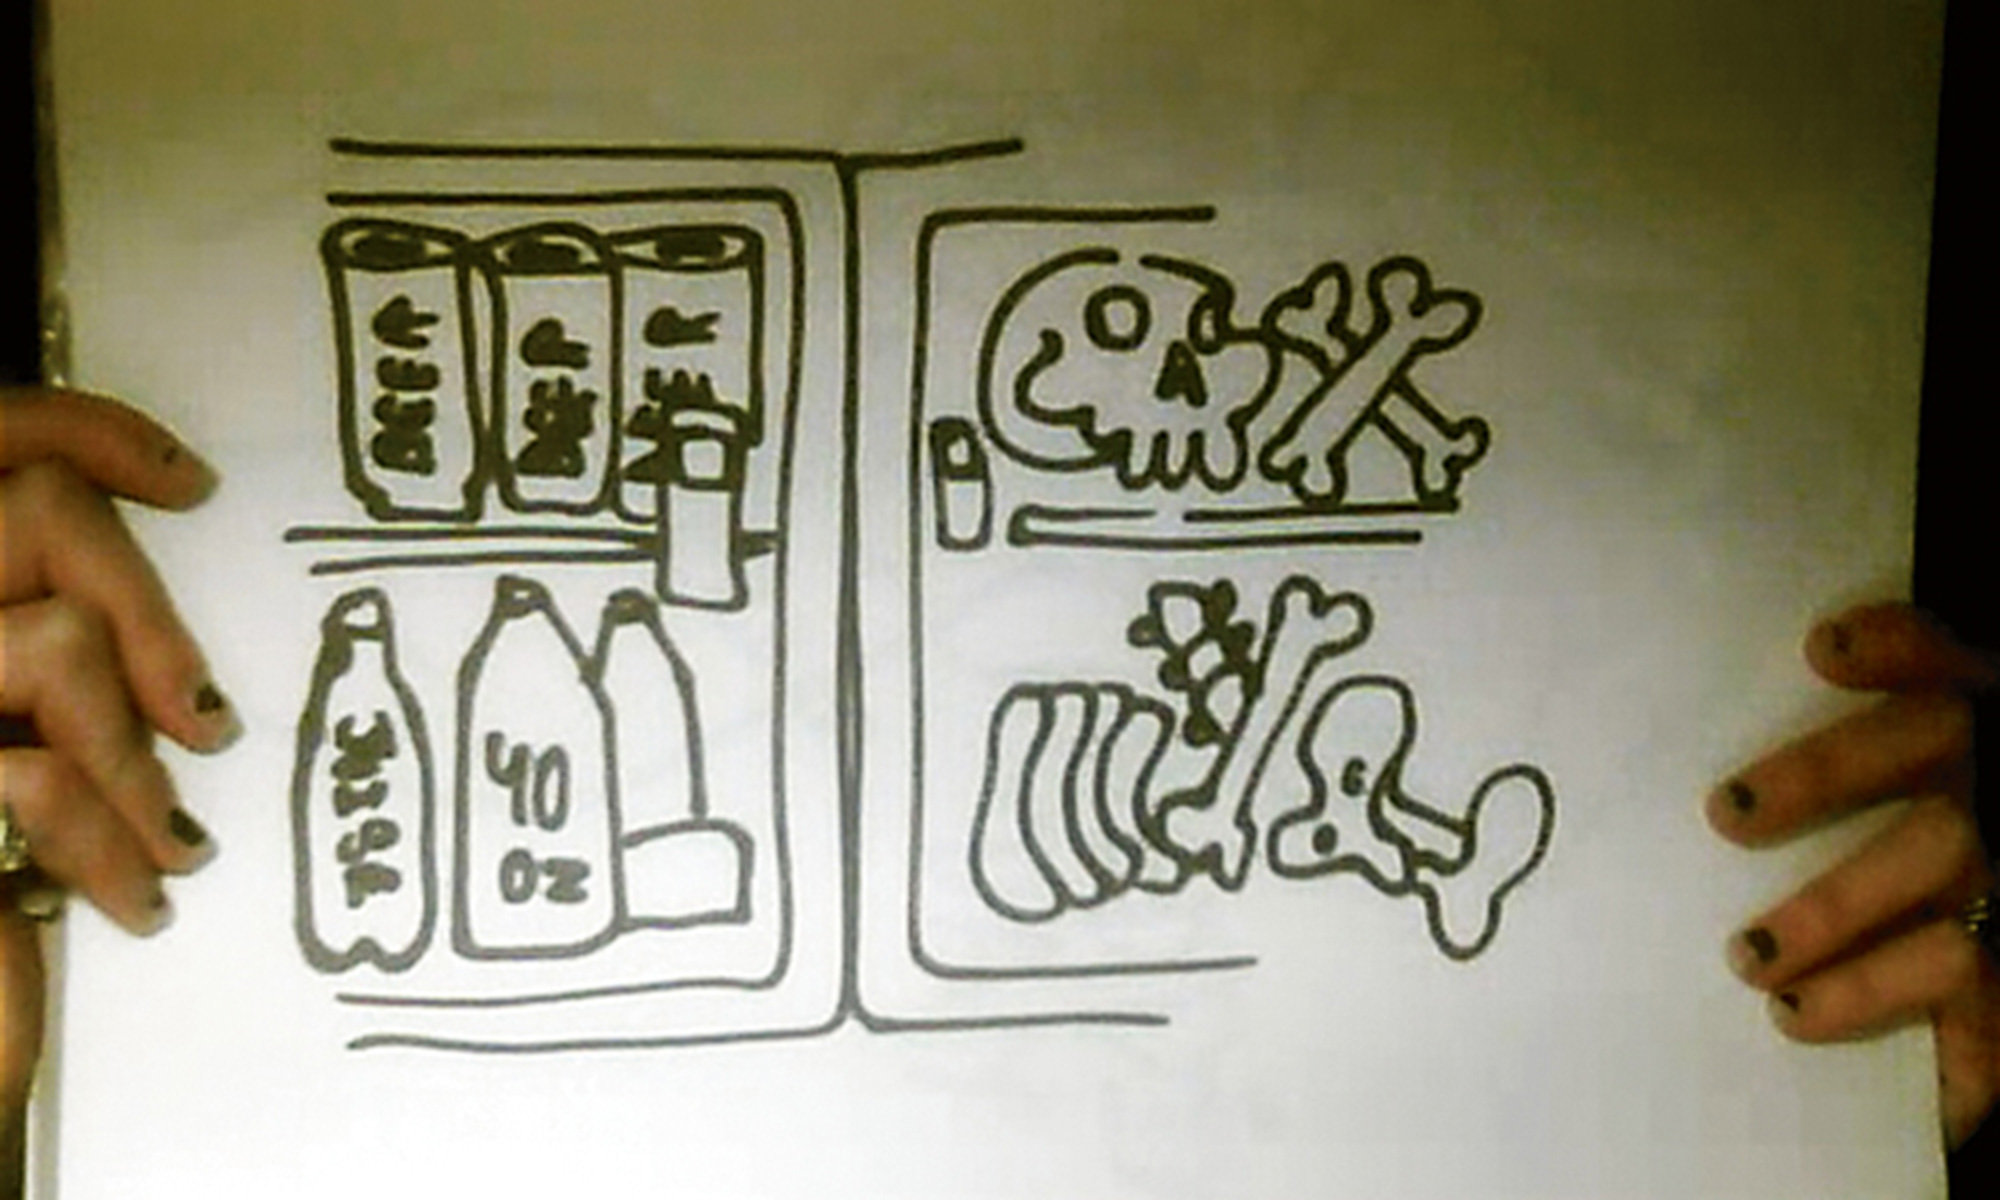 Kat Dee’s drawing of a fridge filled with beer and bones.